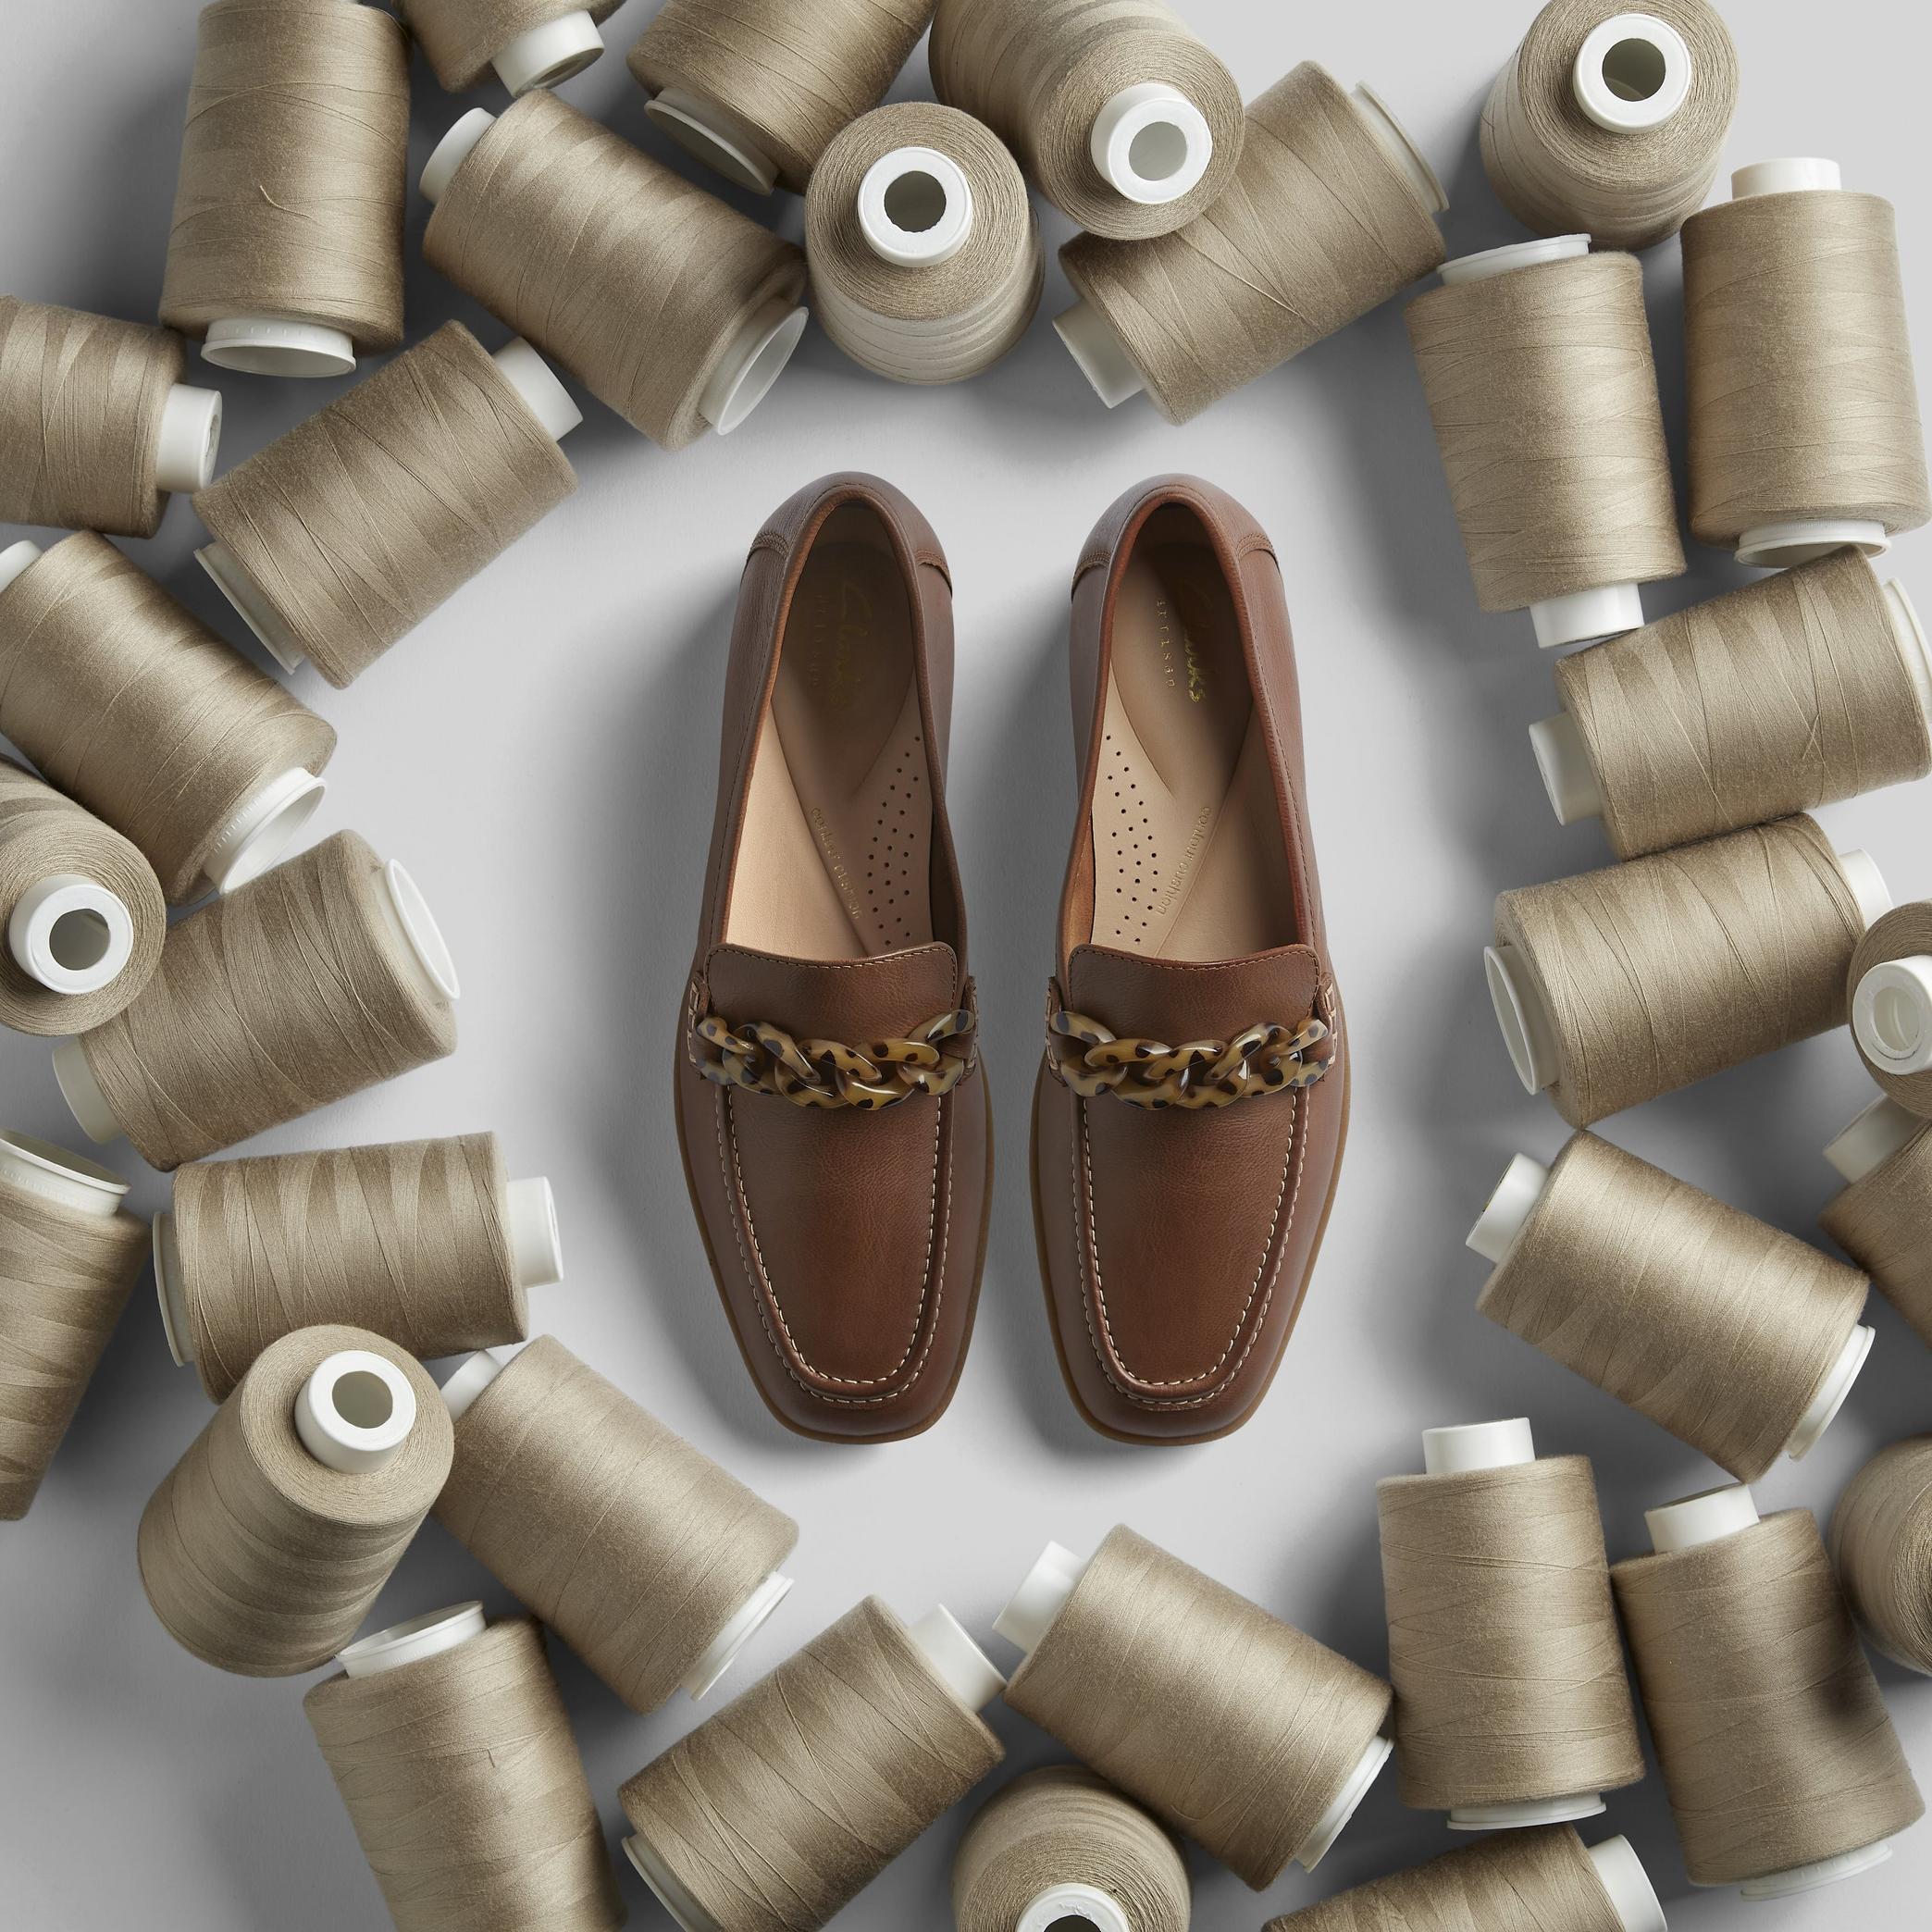 Sarafyna Iris Tan Leather Loafers, view 11 of 11